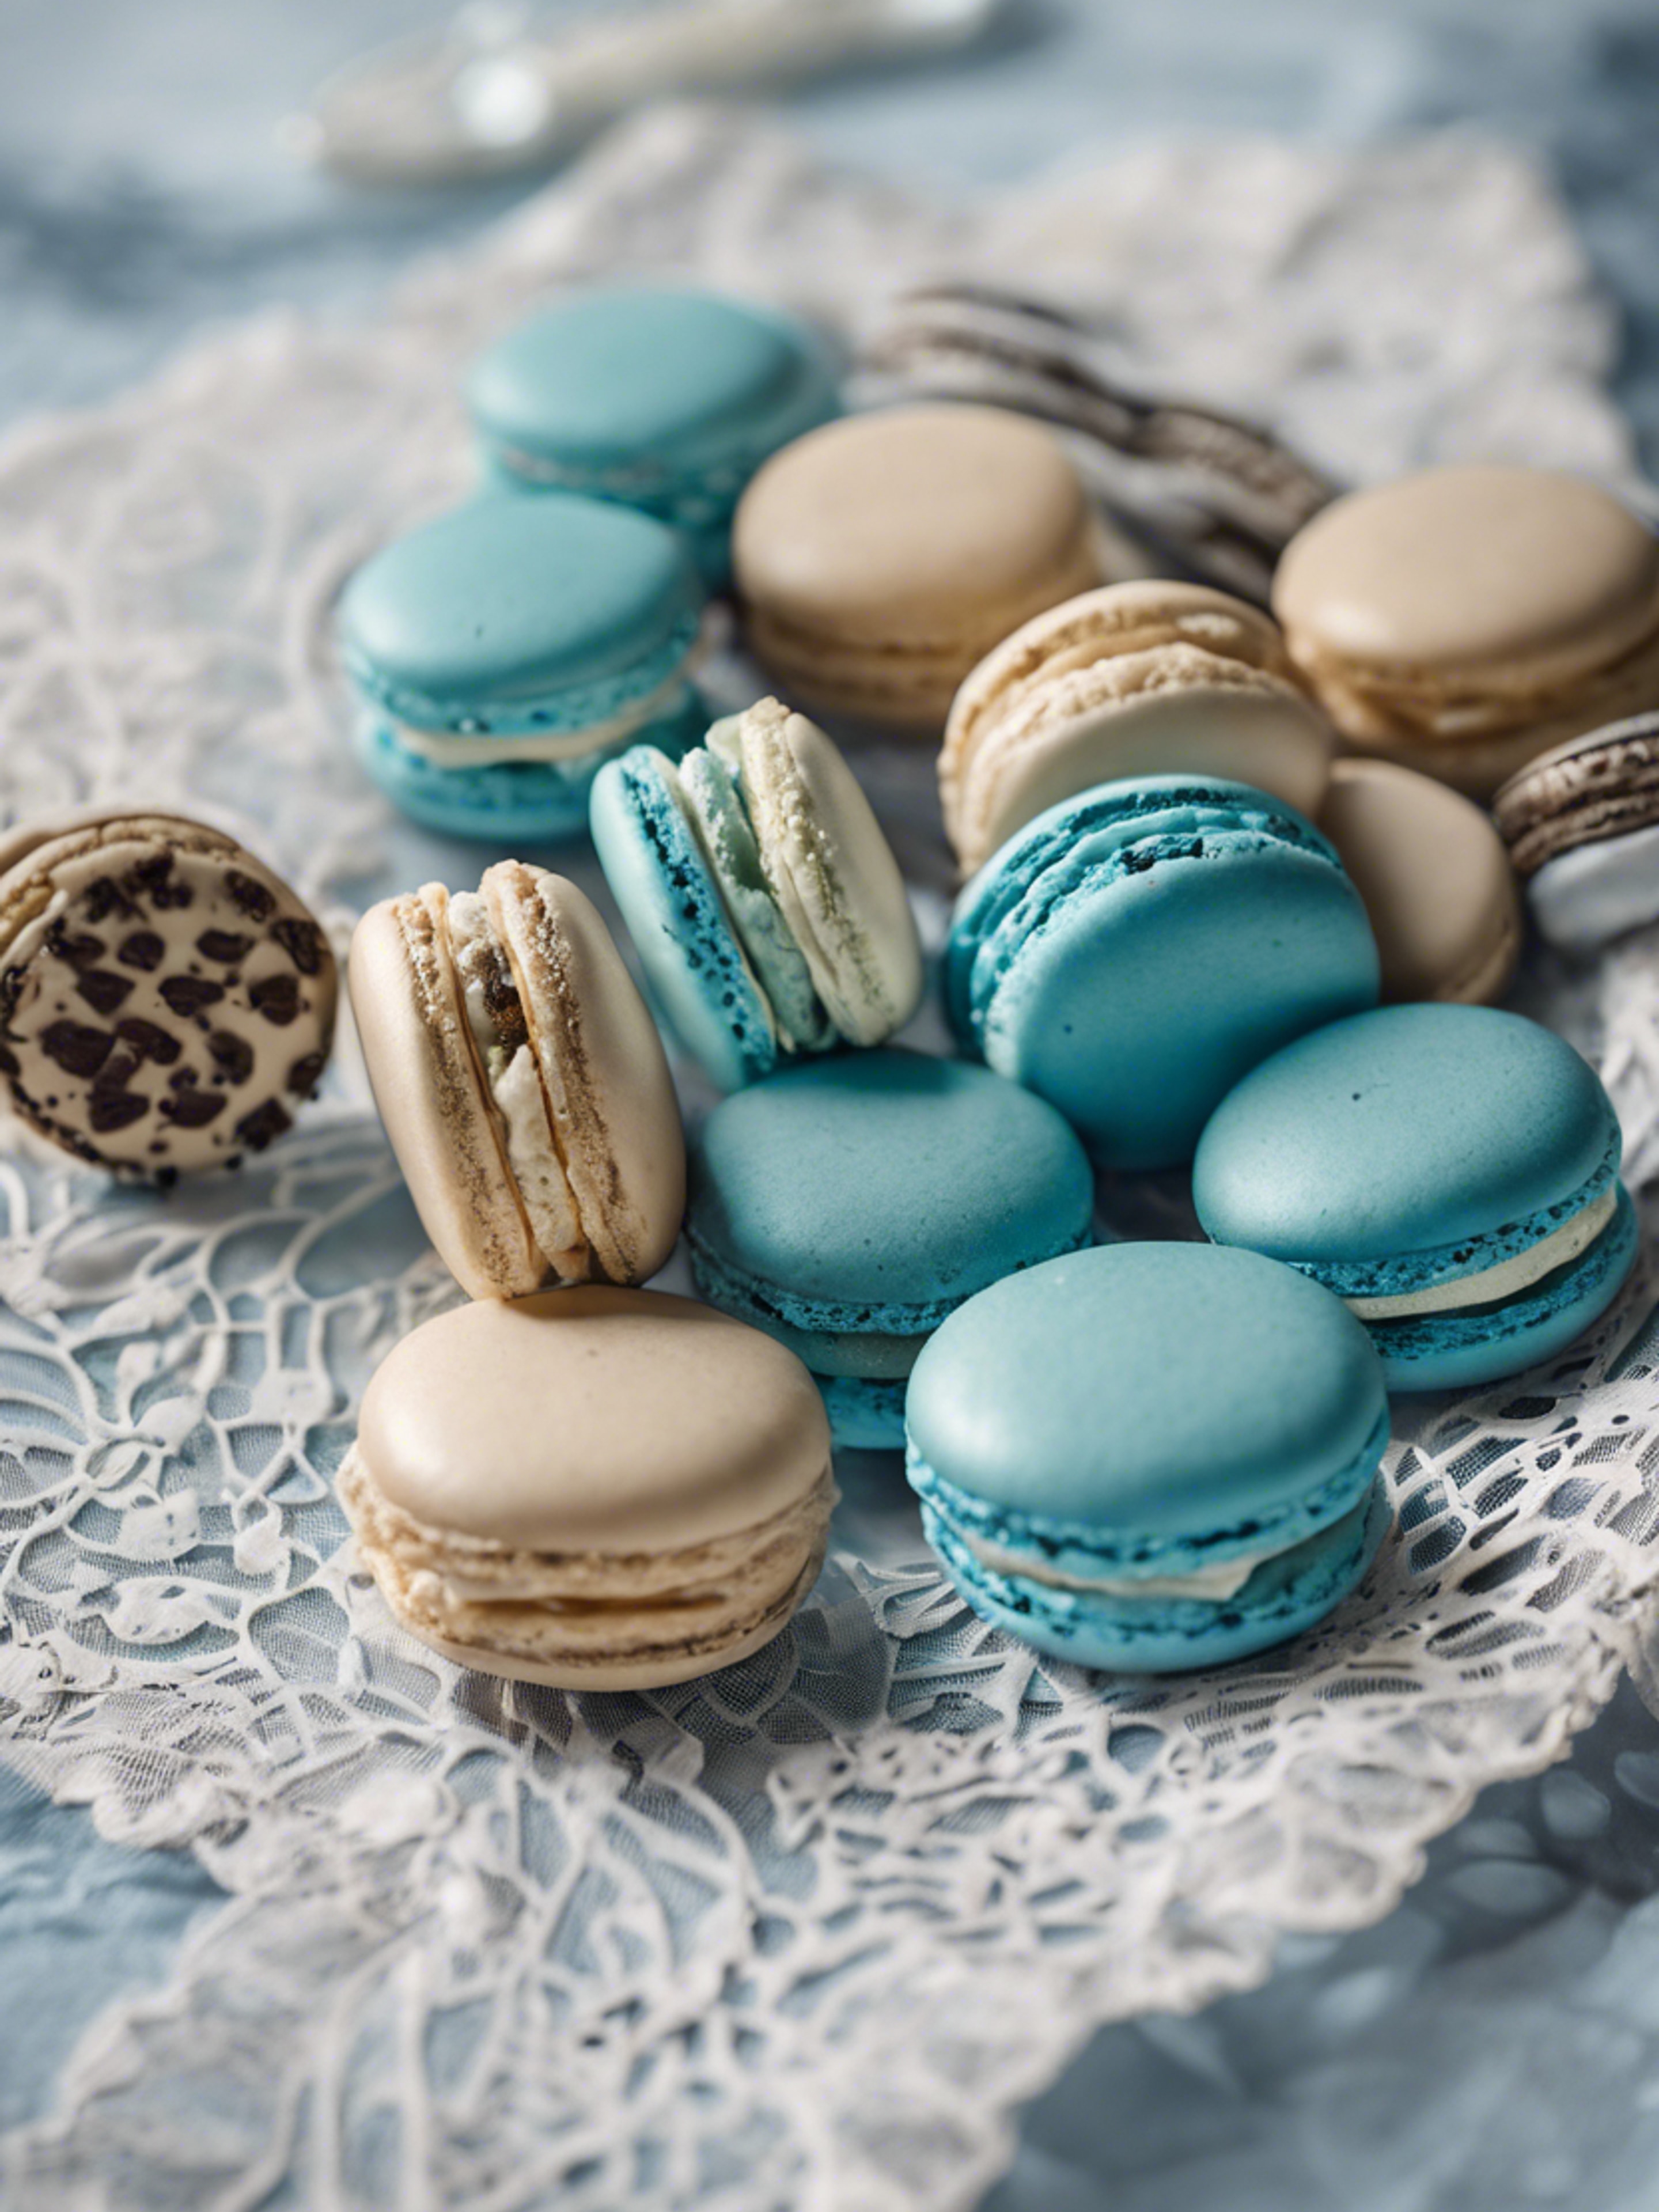 Blue French Macarons artistically arranged on an antique white lace tablecloth. Kertas dinding[73469cabdbbf44728762]